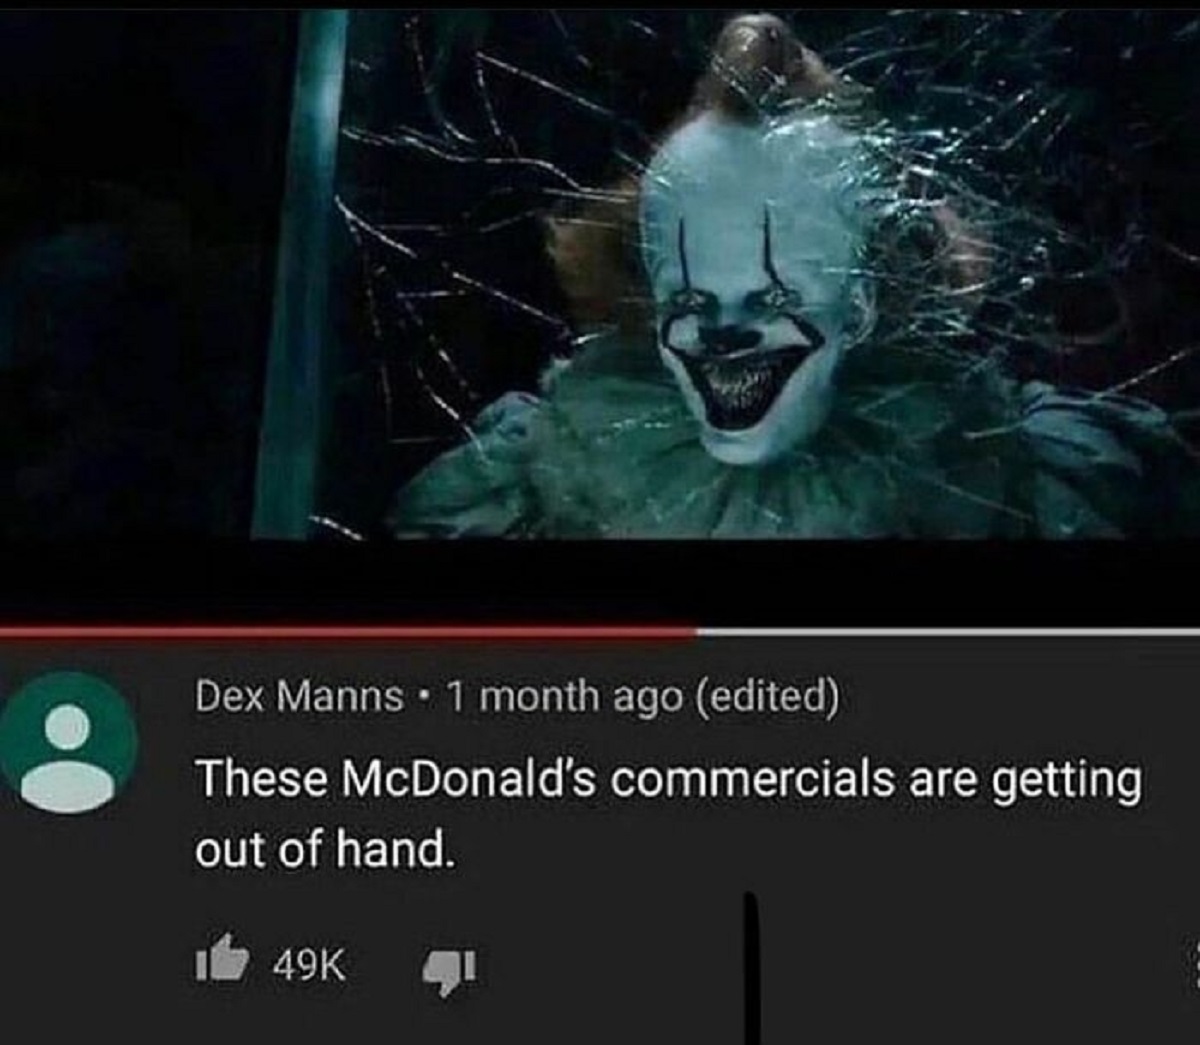 first it movie - Dex Manns 1 month ago edited These McDonald's commercials are getting out of hand. 49K